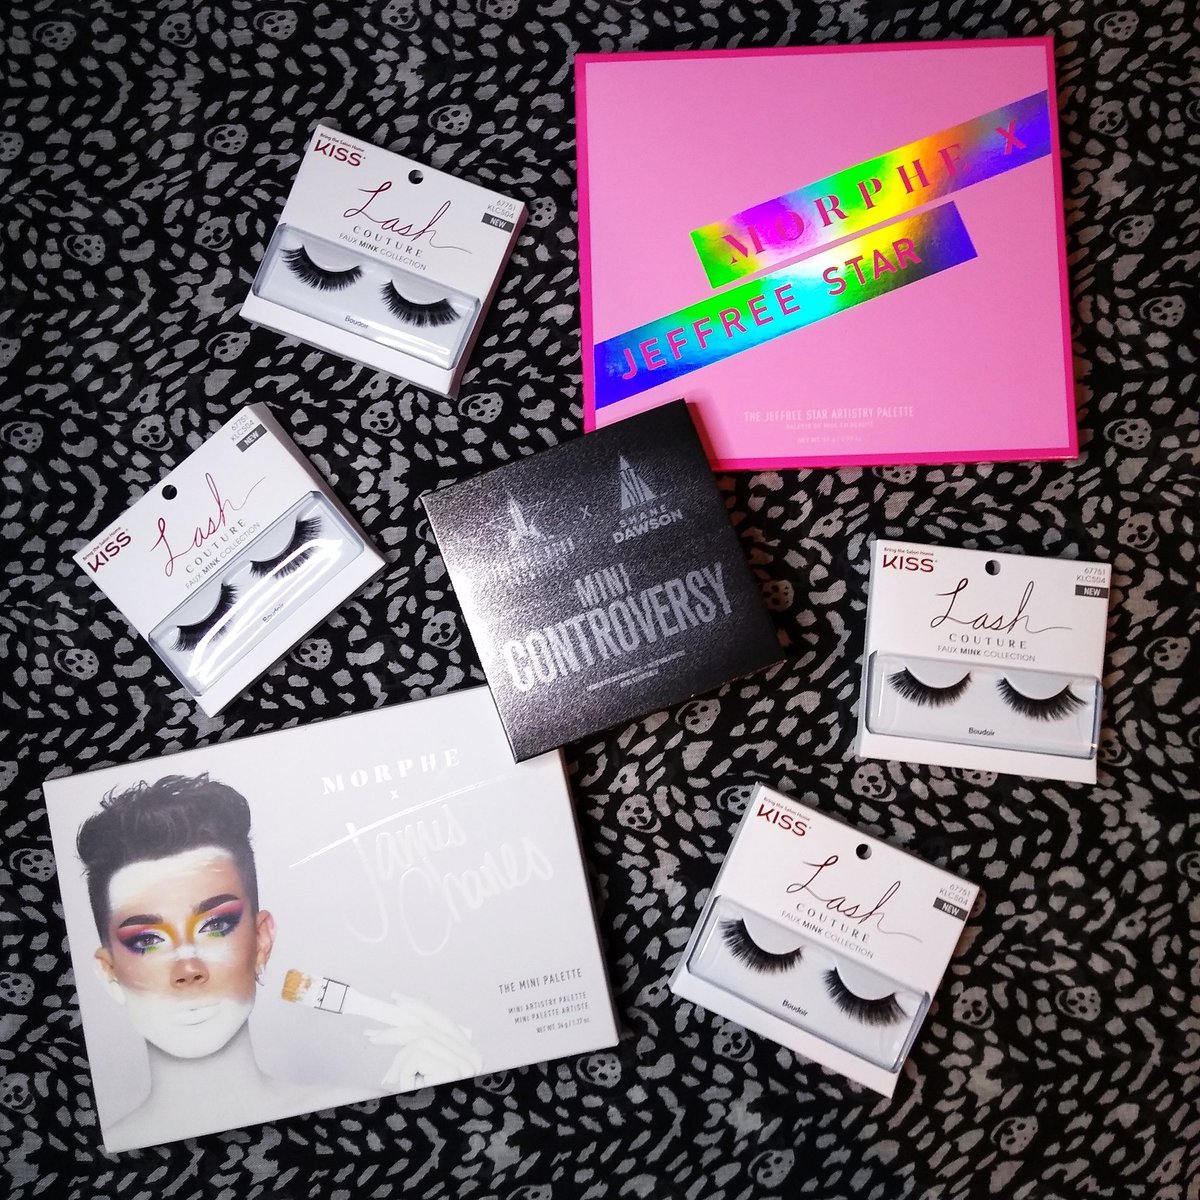 Just for fun, a Controversy #Giveaway. One lucky winner will win 1 #MiniControversy, 1 #JeffreeXMorphe, 1 mini #JamesCharles, and 4 pair of kiss lashes in style boudoir.

To enter: ​
Like & RT ​
Follow @BlendBeast
Tag 2 friends in comments
Ends: 11/29

Extra entry IG: @BlendBeast